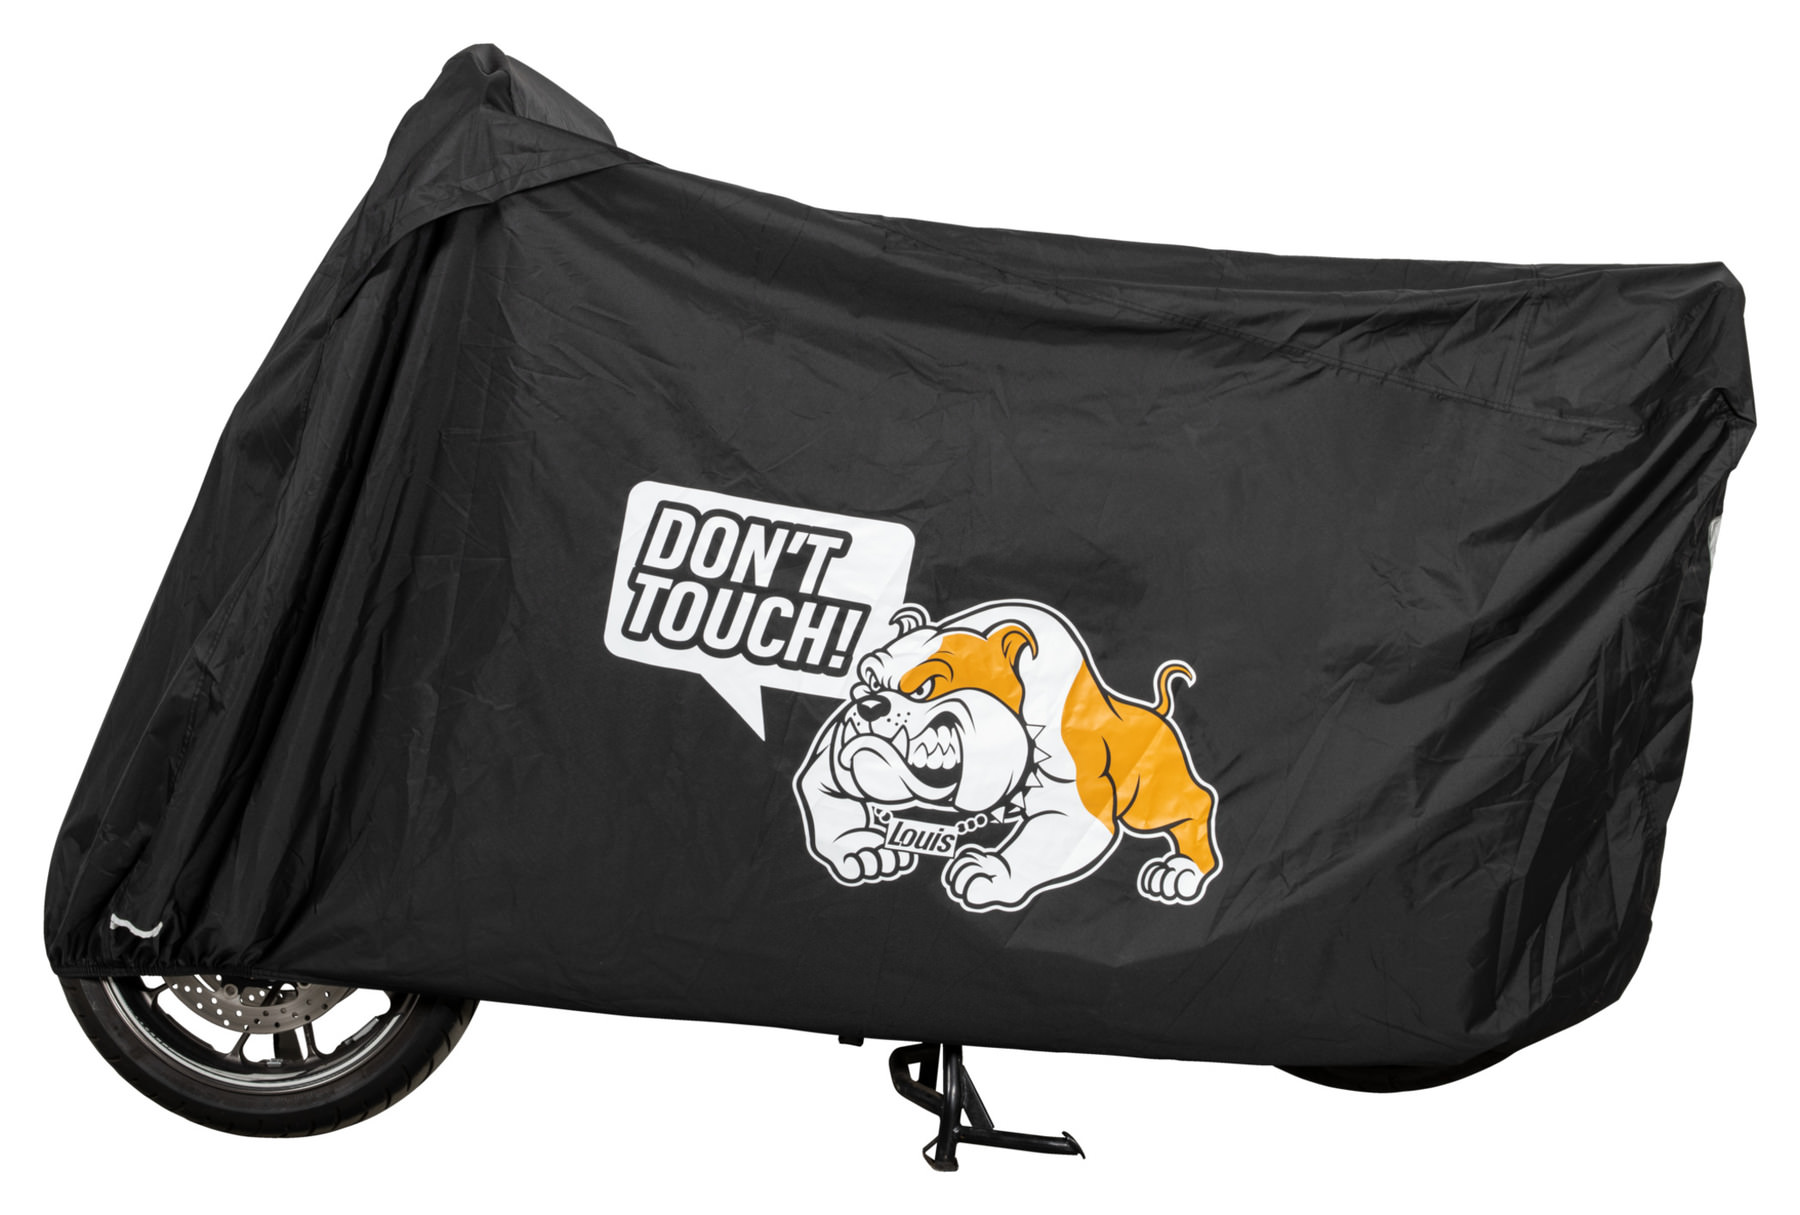 Louis Outdoor Cover Brutus BLACK low-cost | Louis 🏍️